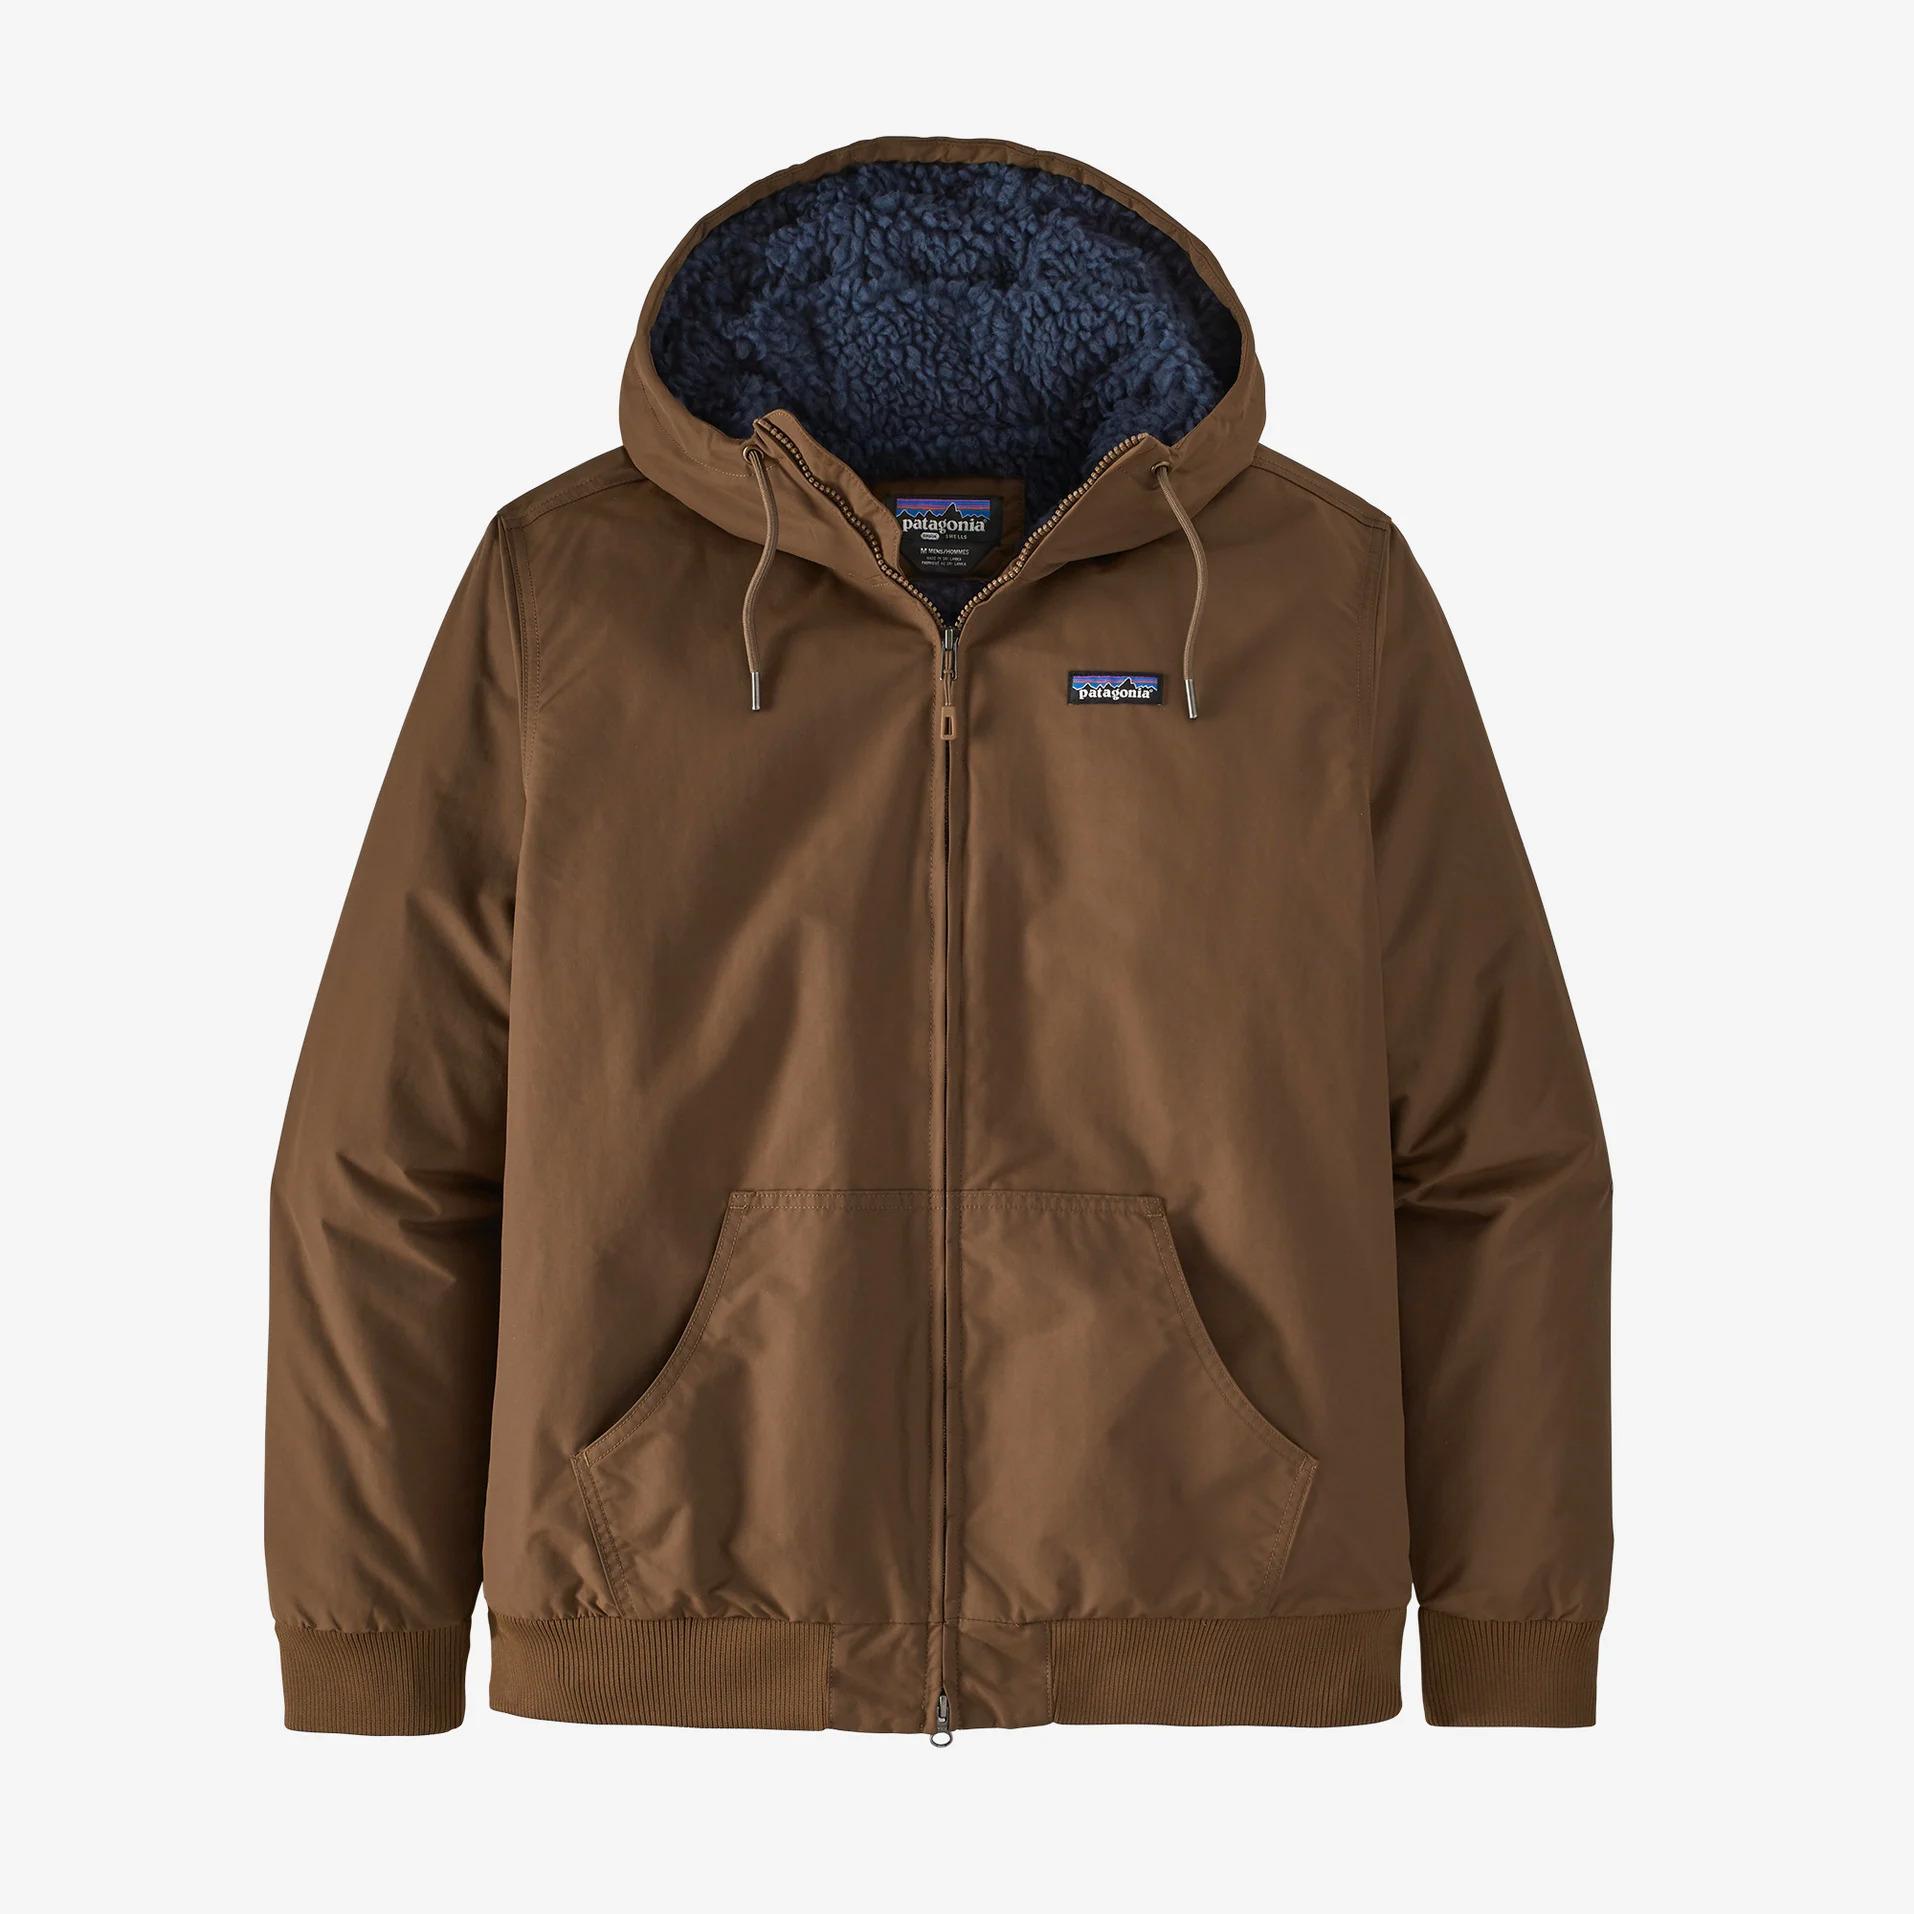 Patagonia Mens Lined Isthmus Hoody Jacket for $113.99 Shipped